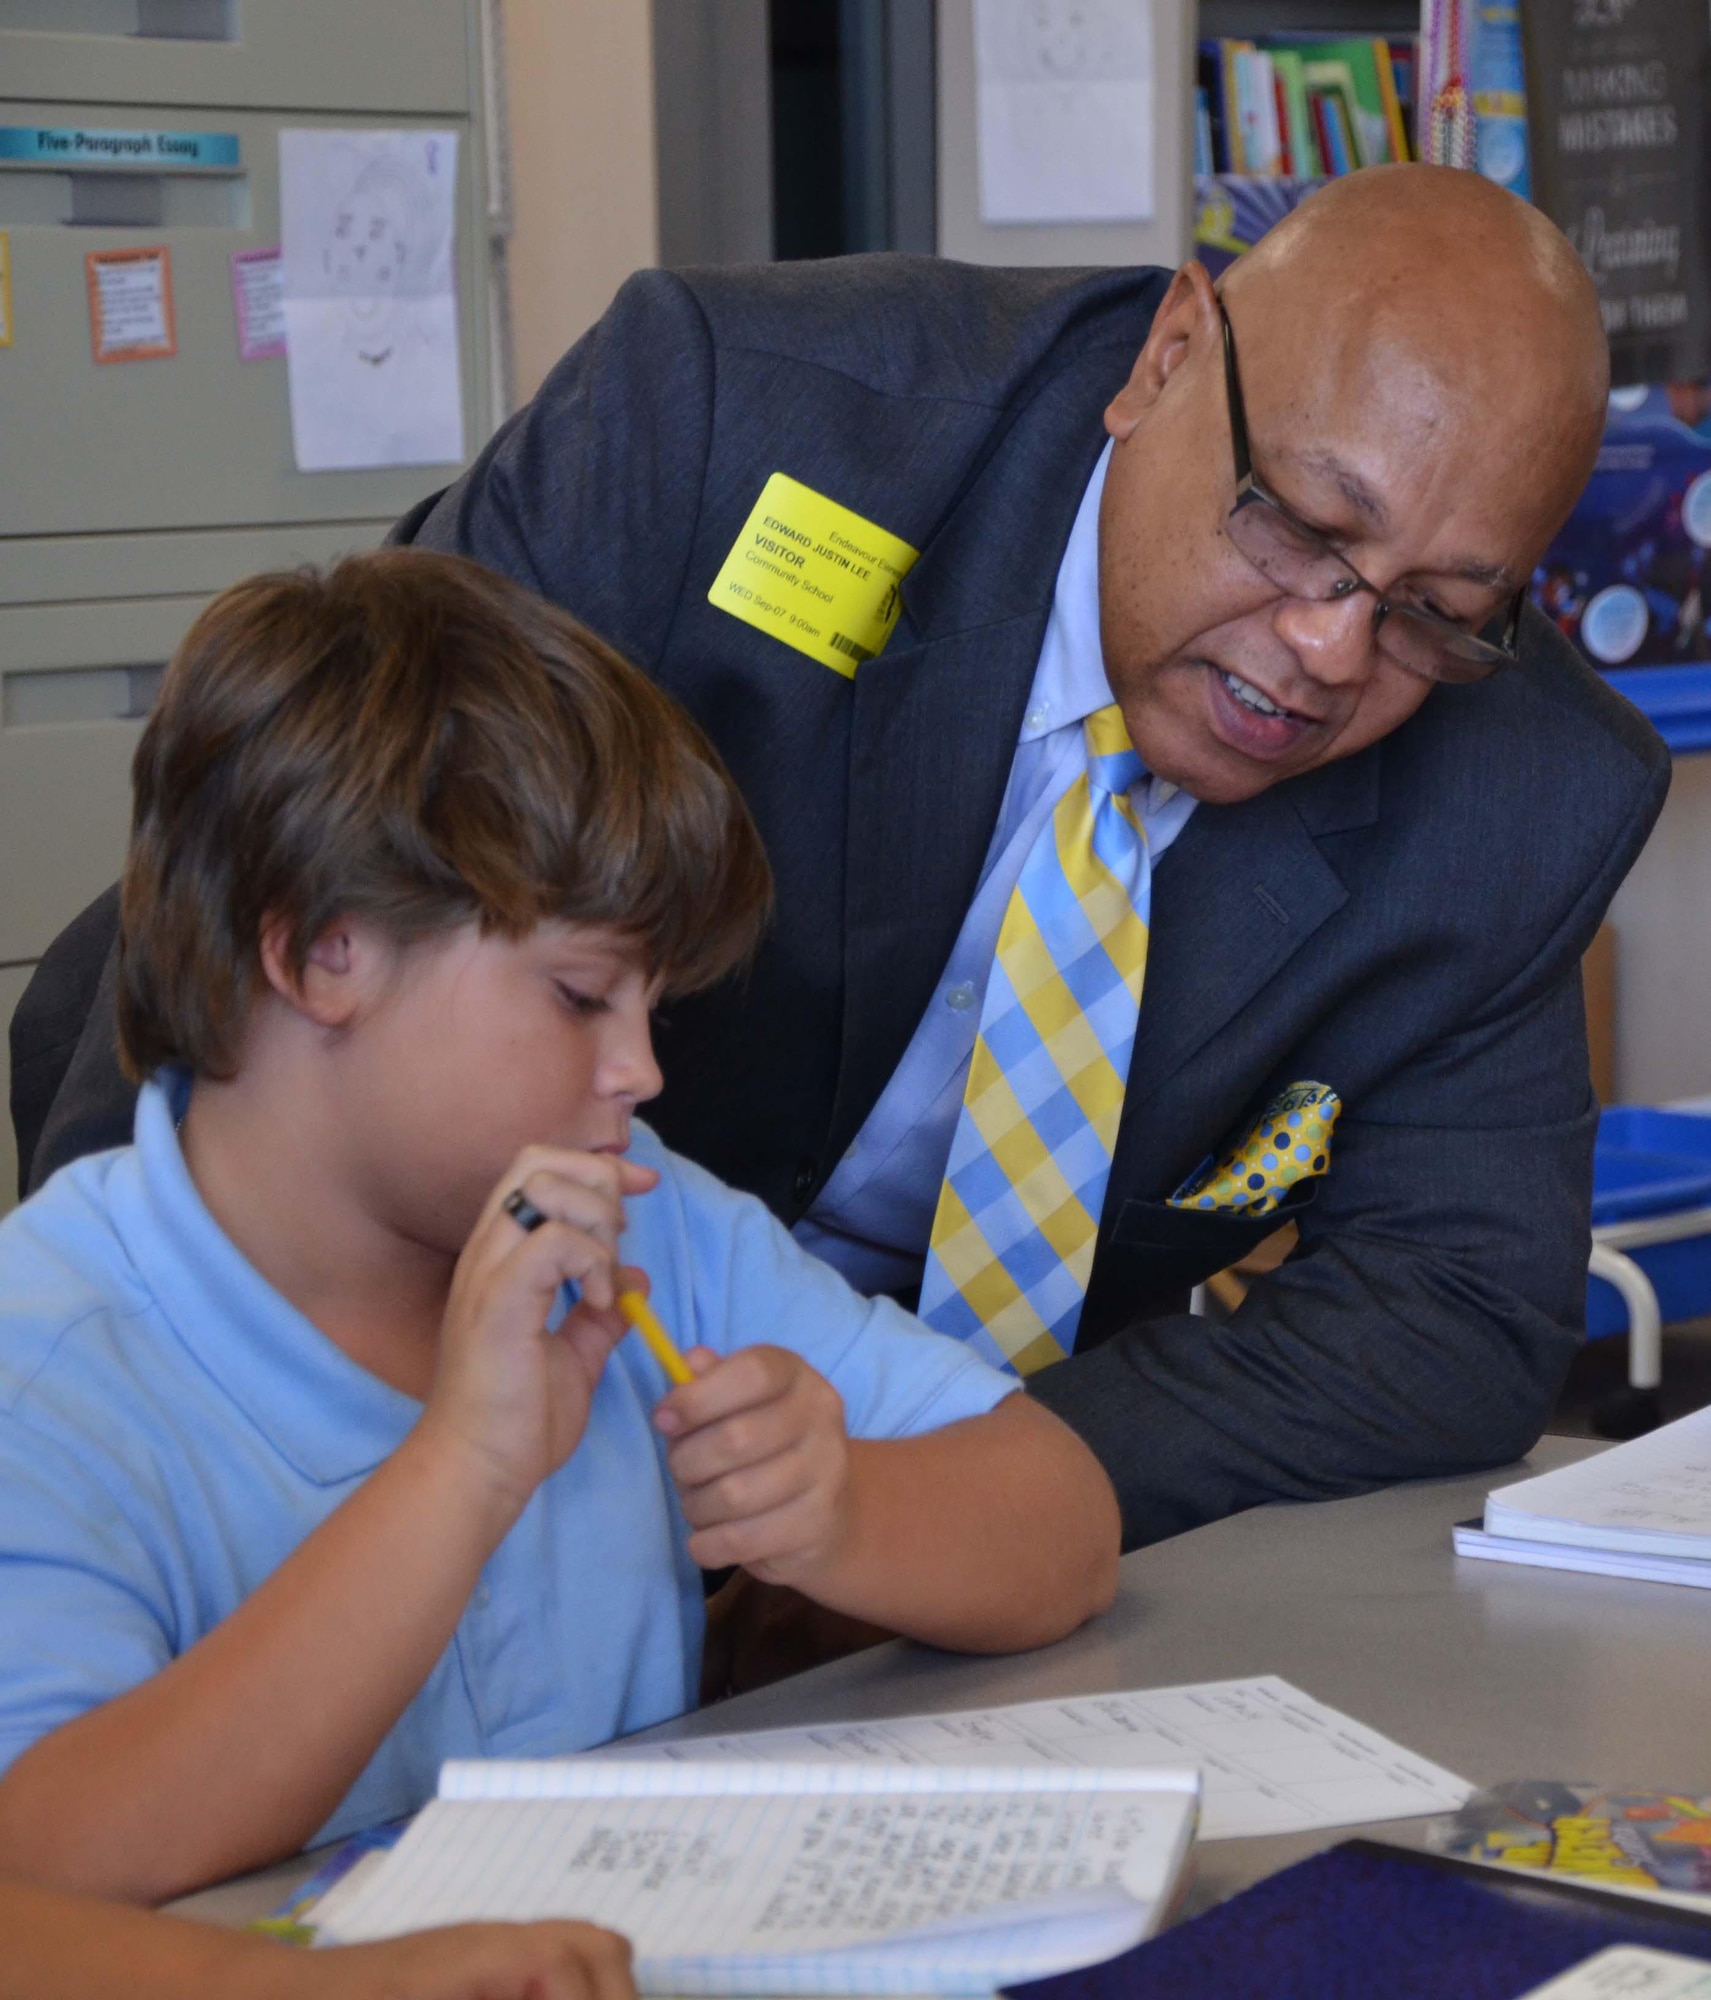 Ed Lee, program coordinator for historically black colleges, universities and minority-serving institutions, looks over classwork with Clayton Hovik, a 5th grader in Stephanie Lay’s science class at Endeavour Elementary School in Cocoa Fla., Sept. 7, 2016.  Lee visited the Title I facility to observe the partnership between the school and the Air Force Technical Applications Center, Patrick AFB, Fla.  (U.S. Air Force photo by Susan A. Romano)

